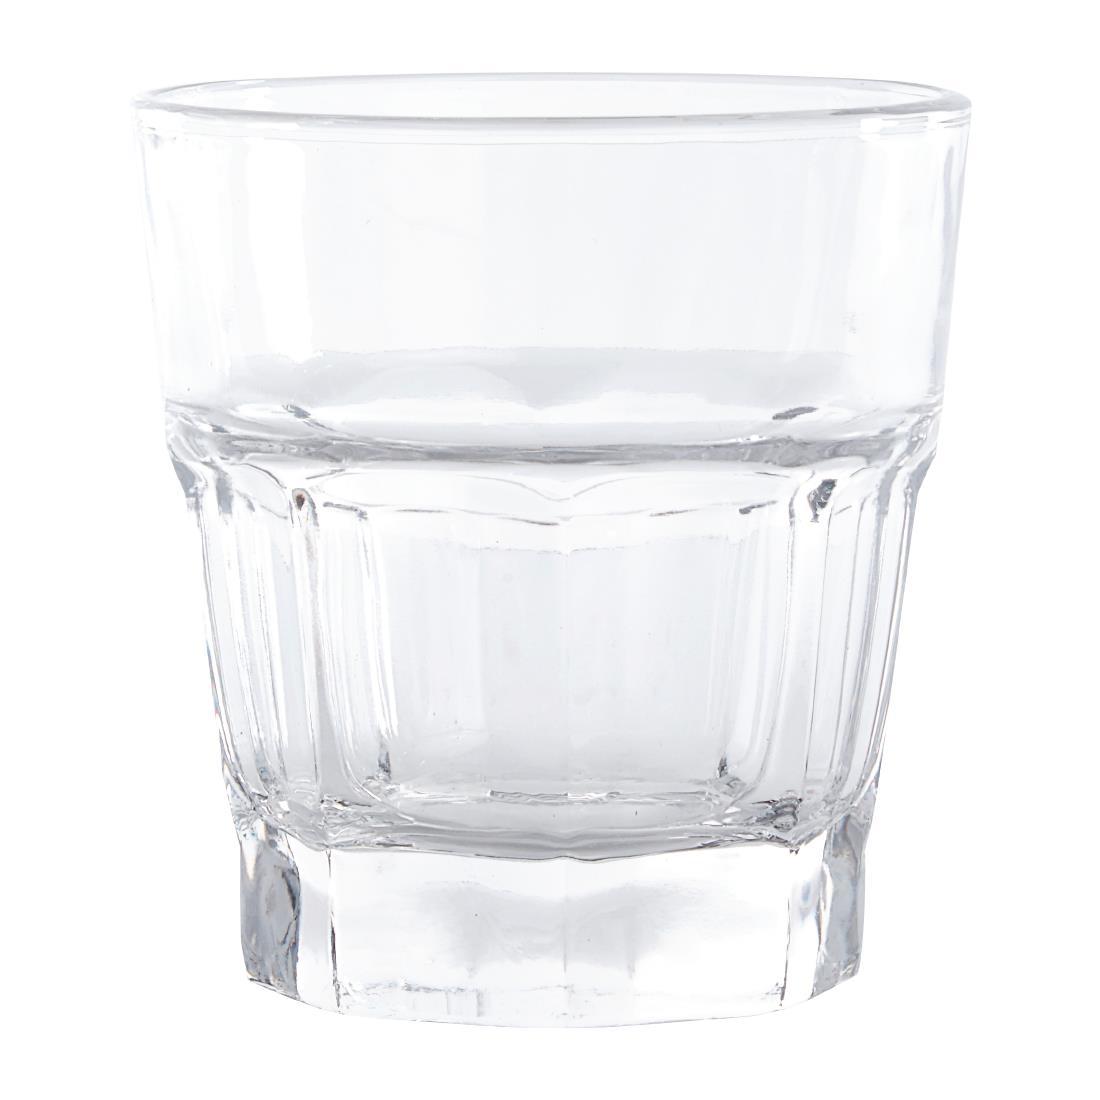 Olympia Toughened Orleans Tumblers 240ml (Pack of 12) - GF926  - 1